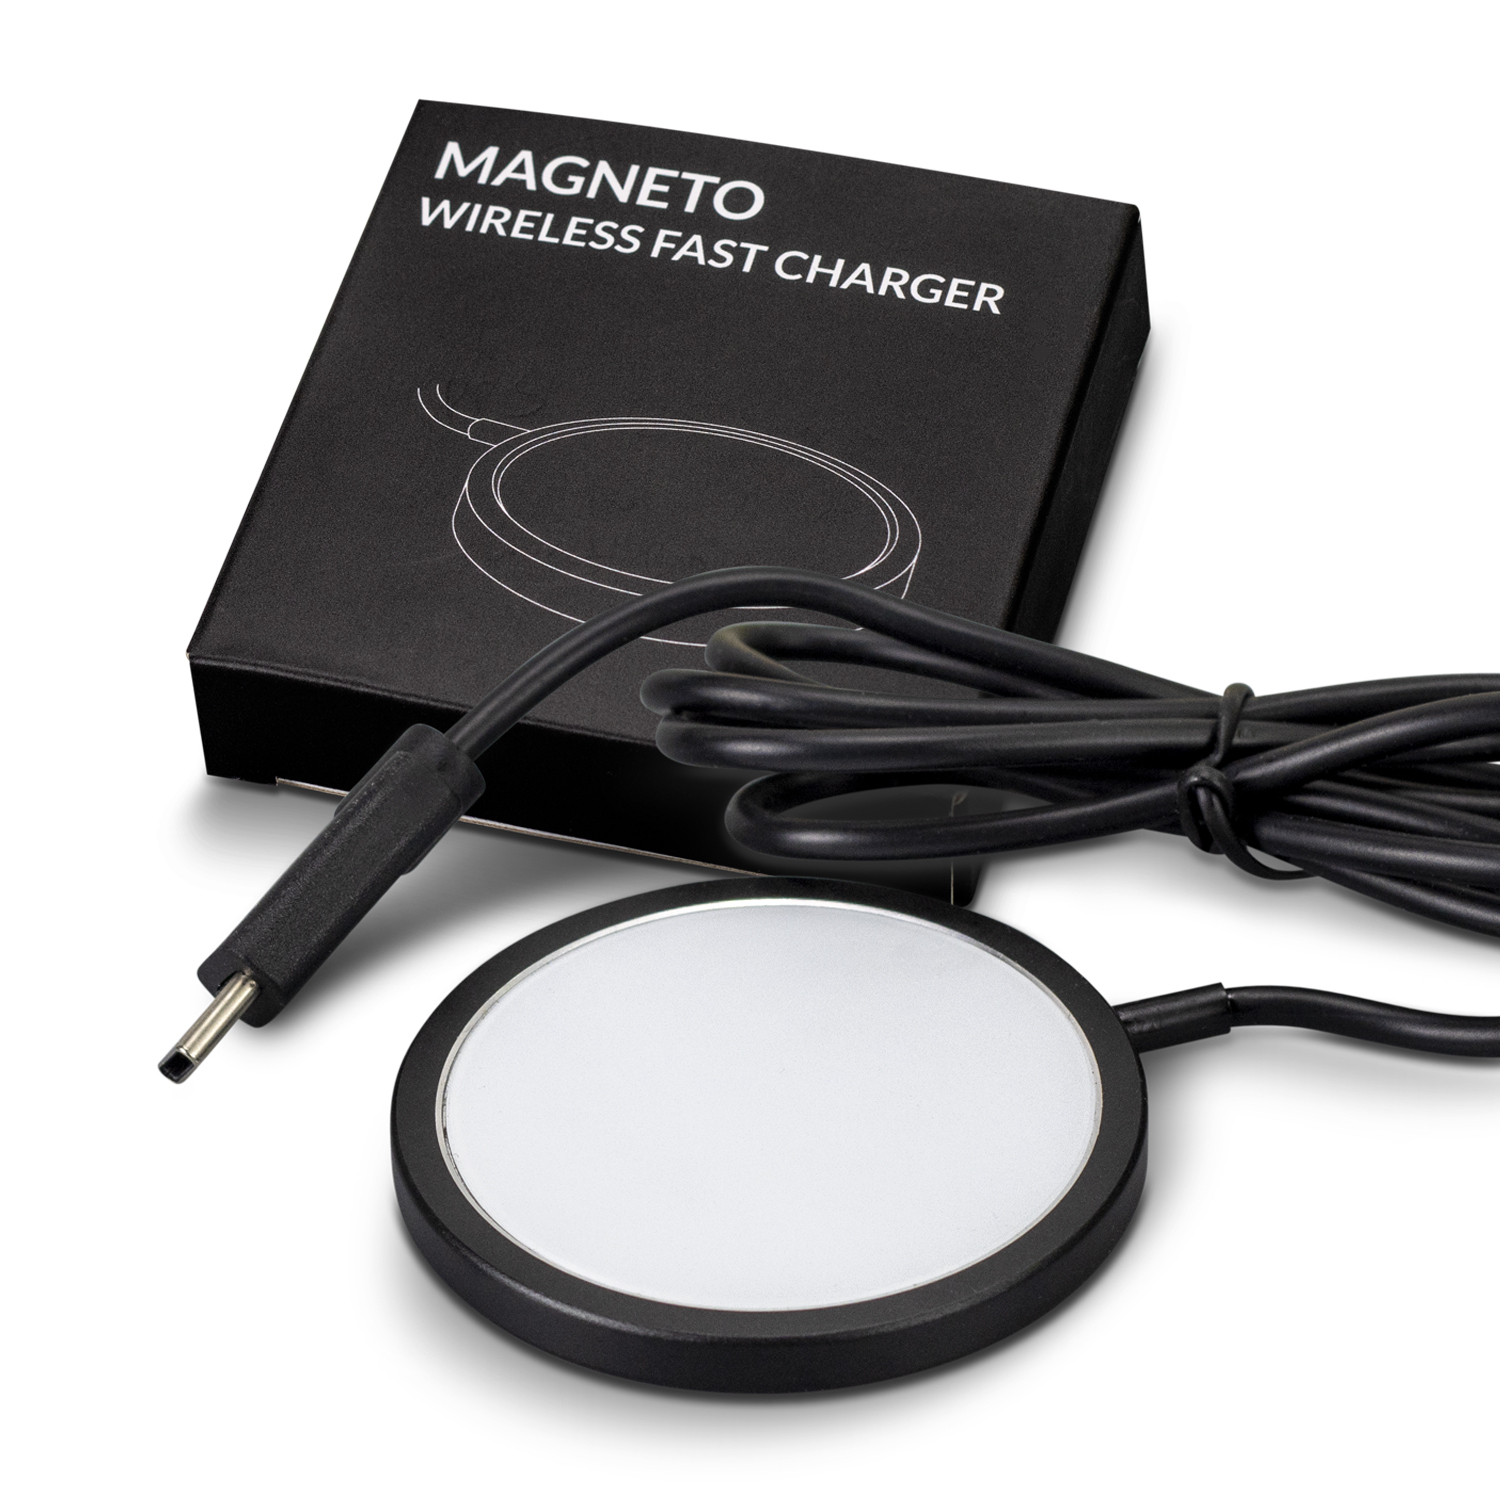 Trends Magneto Wireless Fast Charger charger